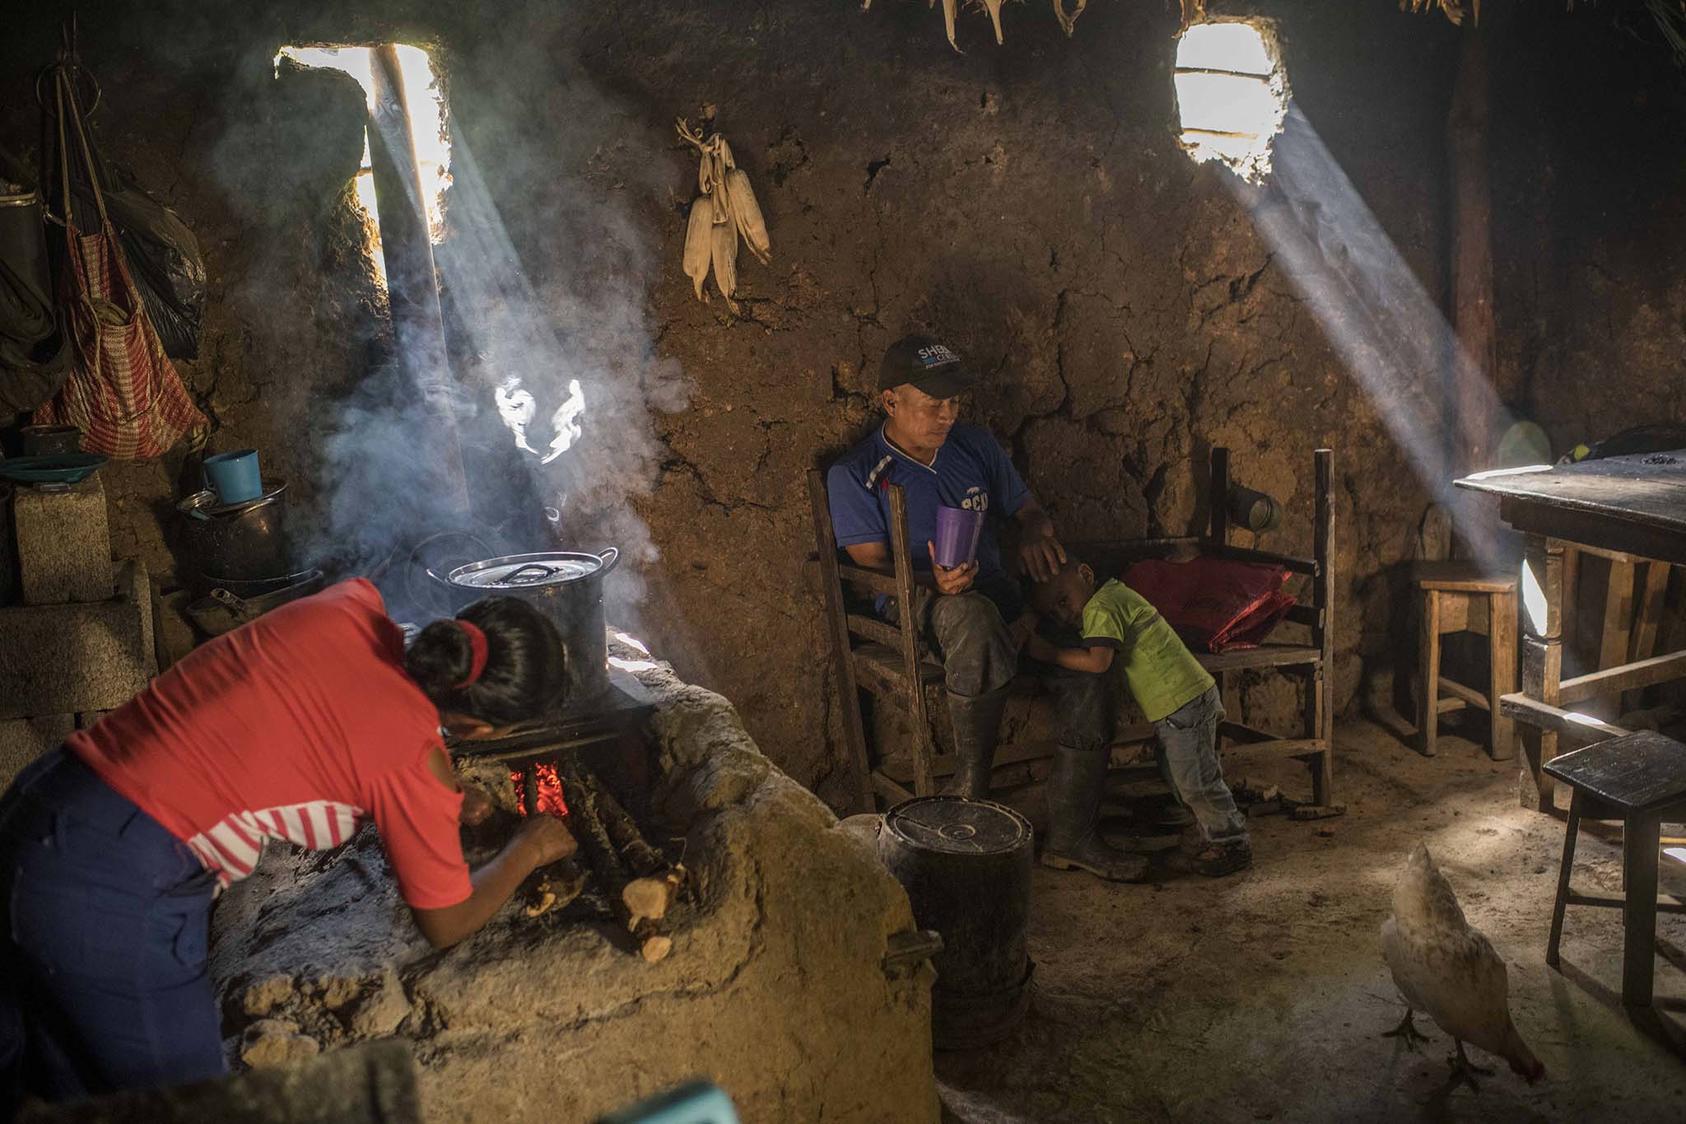 Eduardo Roque rests at home in Guatemala from trying to farm in Central America’s “Dry Corridor”—home to 11 million people across five nations. Extreme heat and drought are forcing families to migrate for survival. (Daniele Volpe/The New York Times)